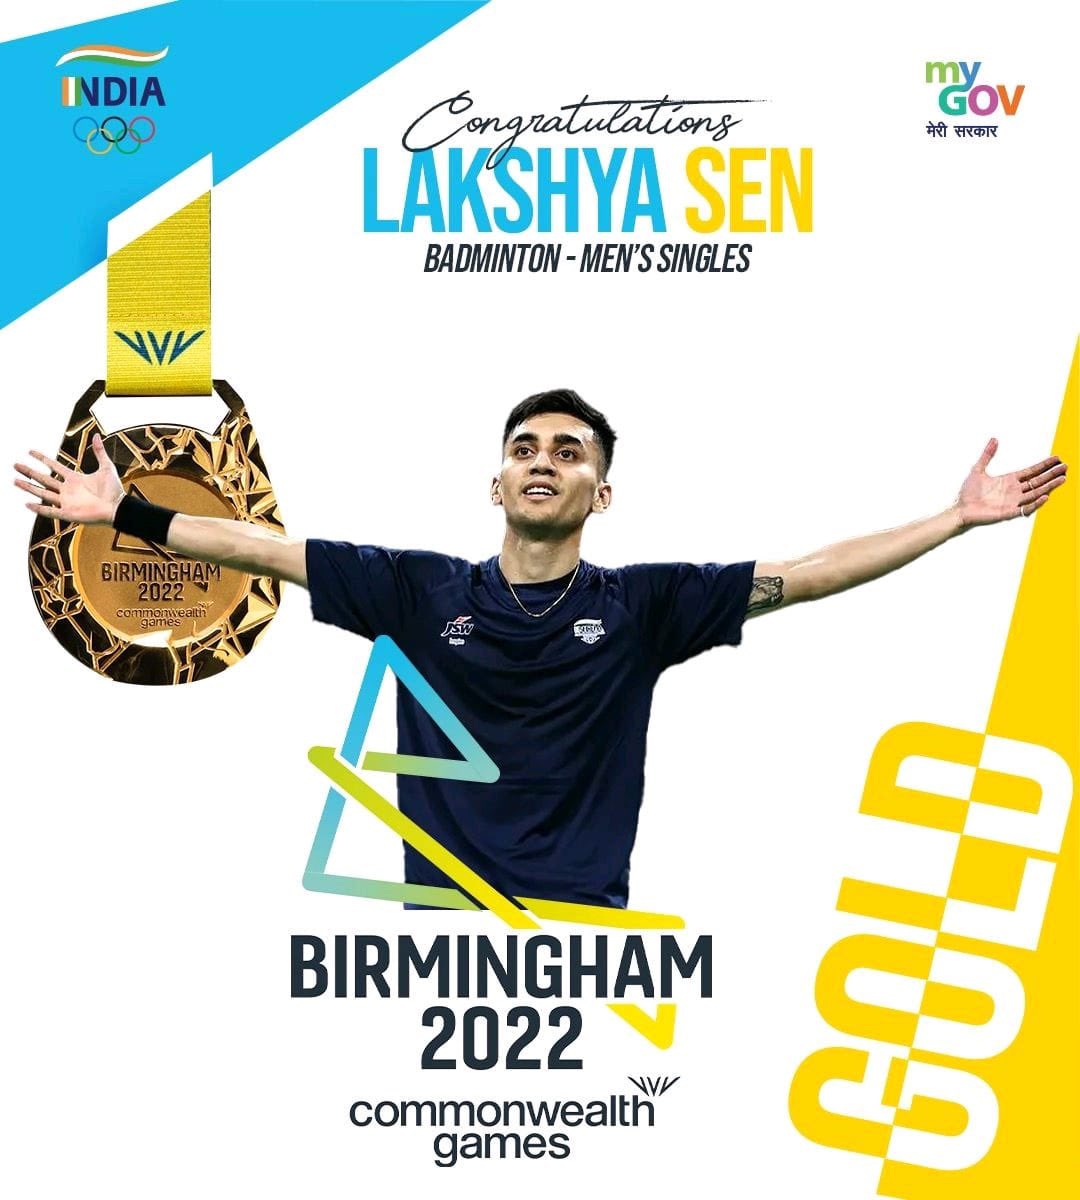 Sensational gold clinched by Lakshya Sen in an absolute classic at Birmingham!
In his debut at CWG20d22 , the 20 year-old boy records the 20th Gold for Indian. Congratulations to LAKSHYA.
#YuvaShakti
#CheerForIndia